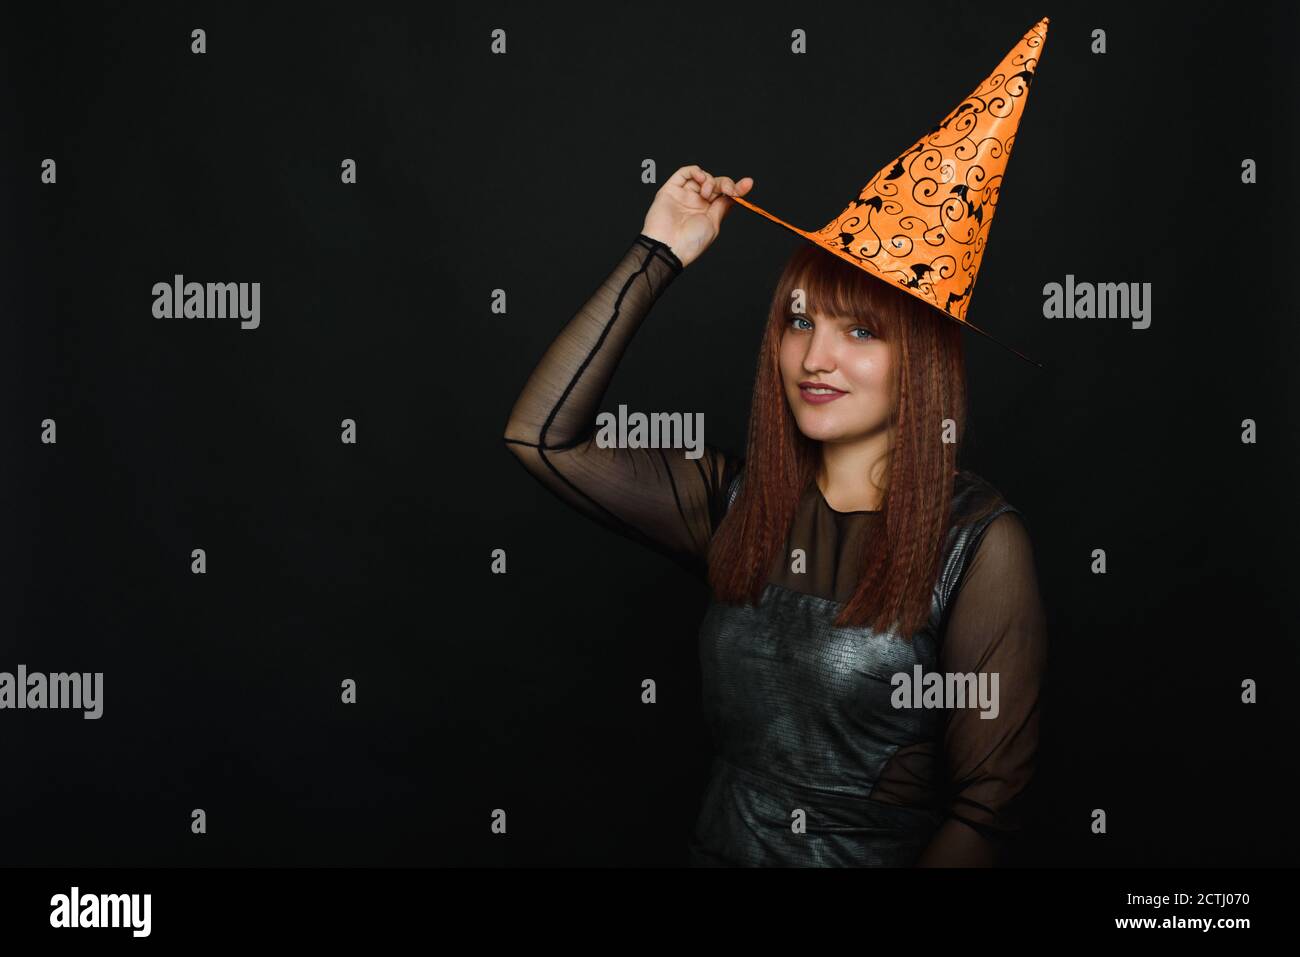 Portrait of winsome, blonde lady look at camera on black background. Photo of cute woman wearing conical hat. Stock Photo